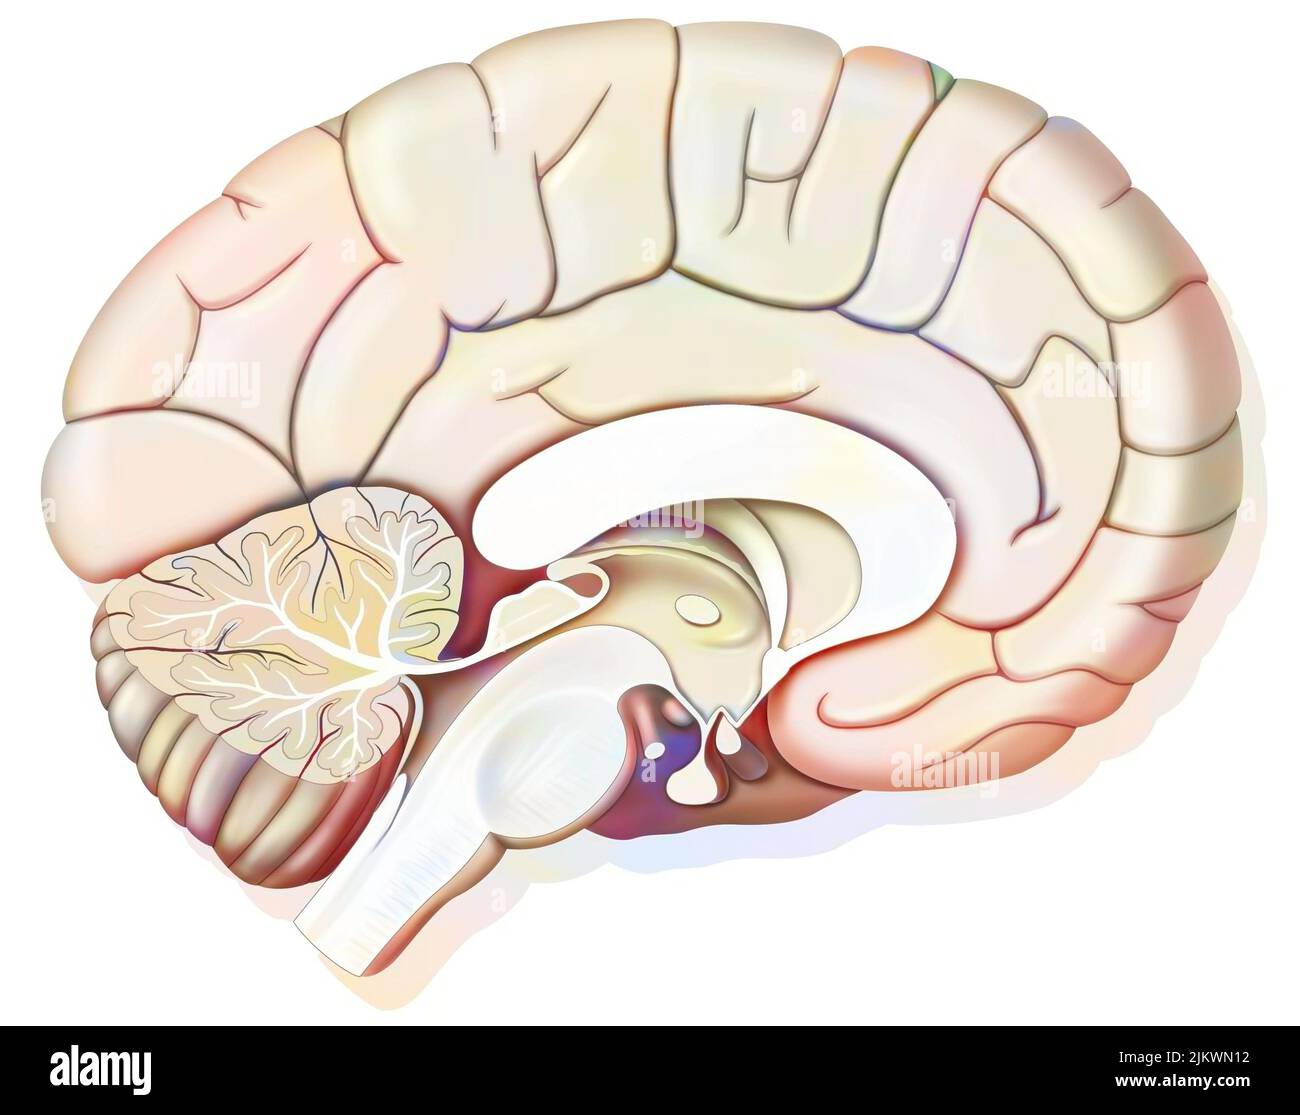 Mid sagittal section of the human brain showing the hypothalamus. Stock Photo